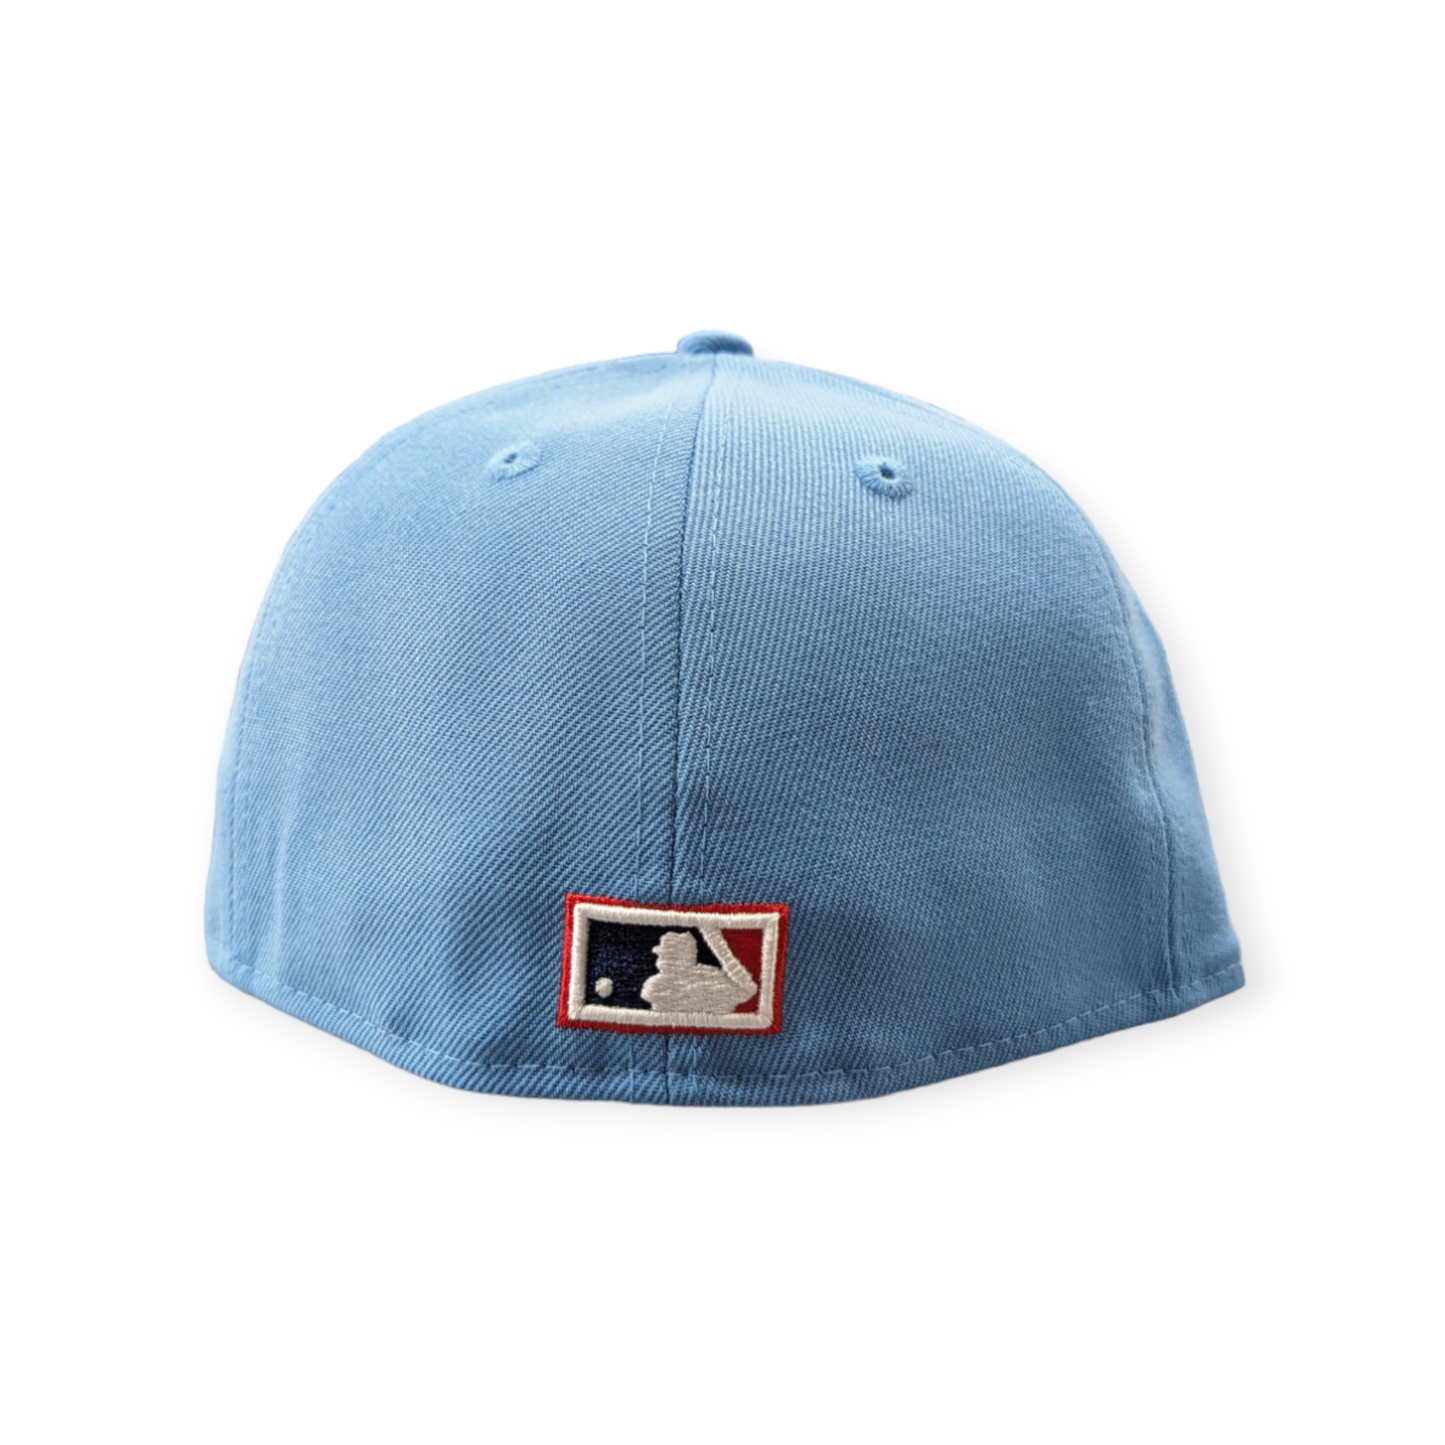 Chicago White Sox 1933 ASG New Era Sky Blue 59FIFTY Fitted Hat